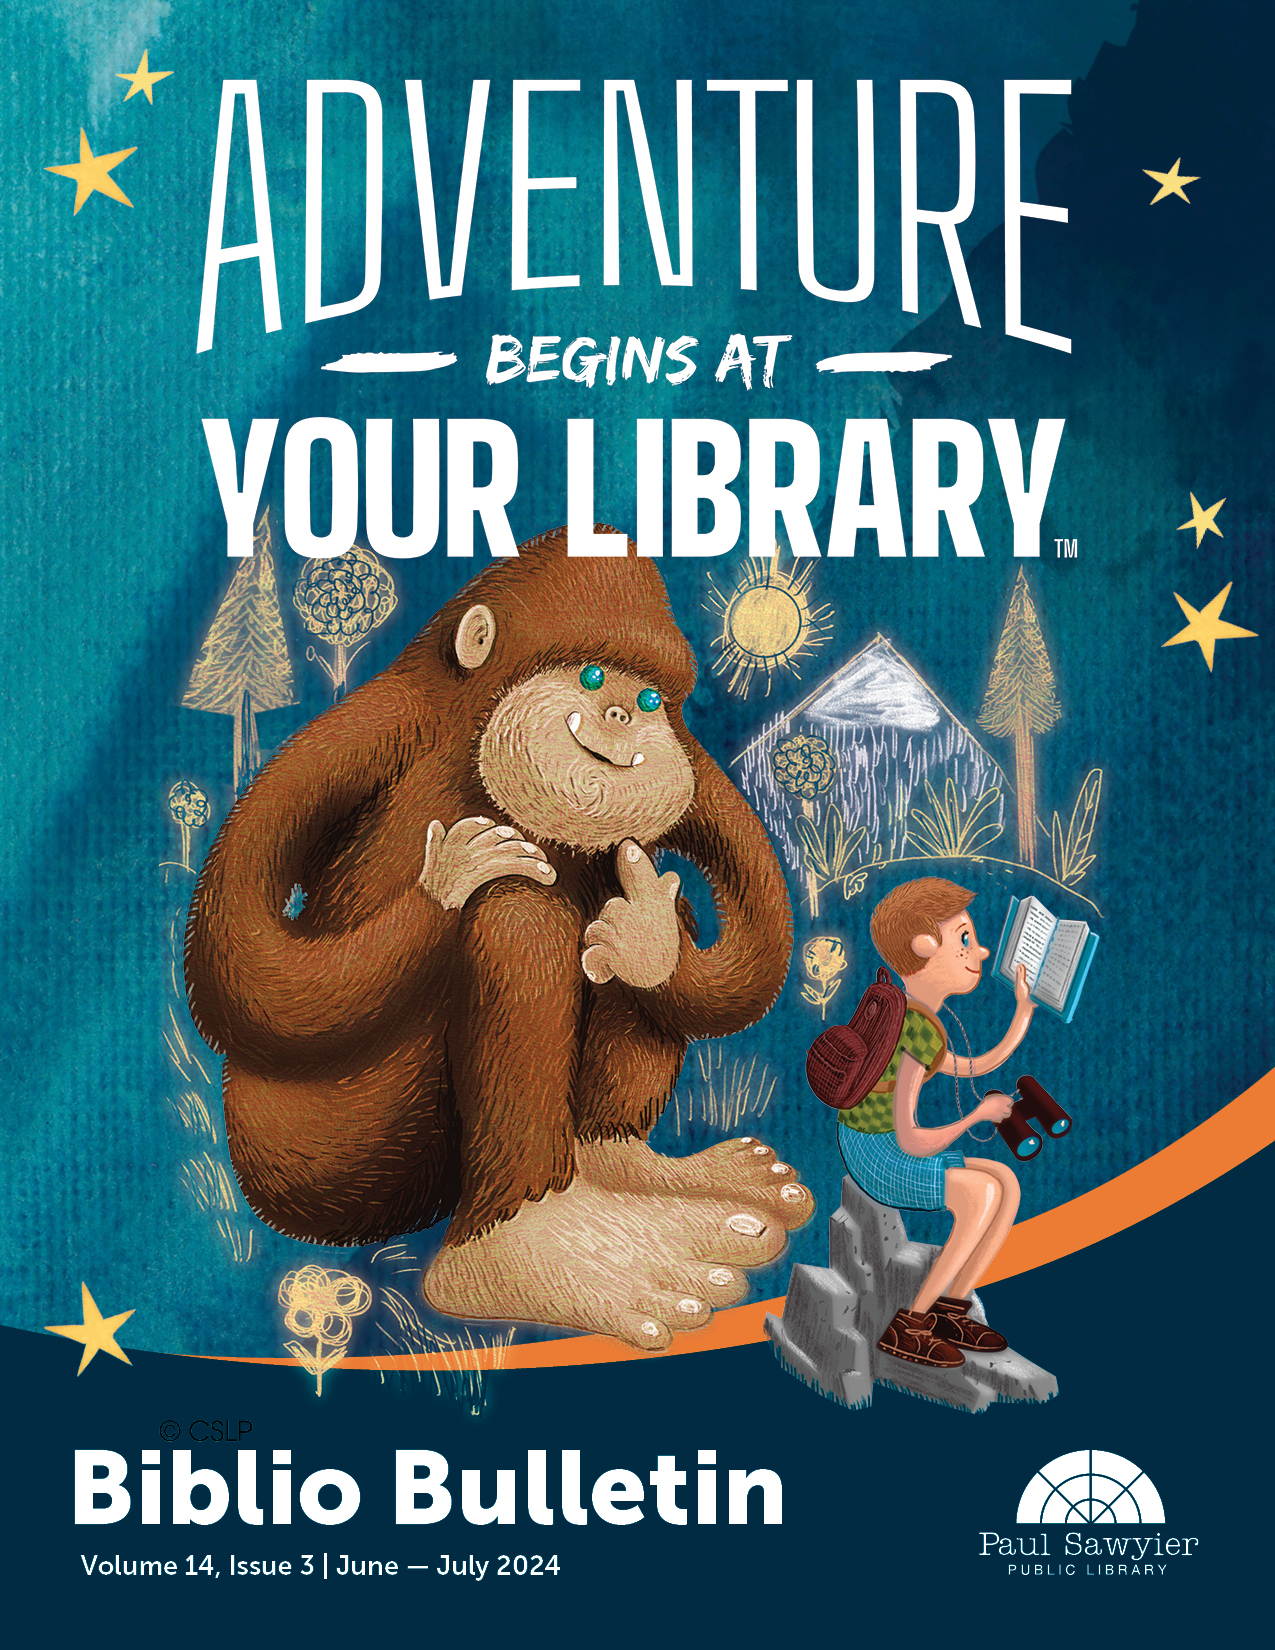 Newsletter Cover image. Drawing of big foot and a boy reading a book with the text Adventure begins at your library.